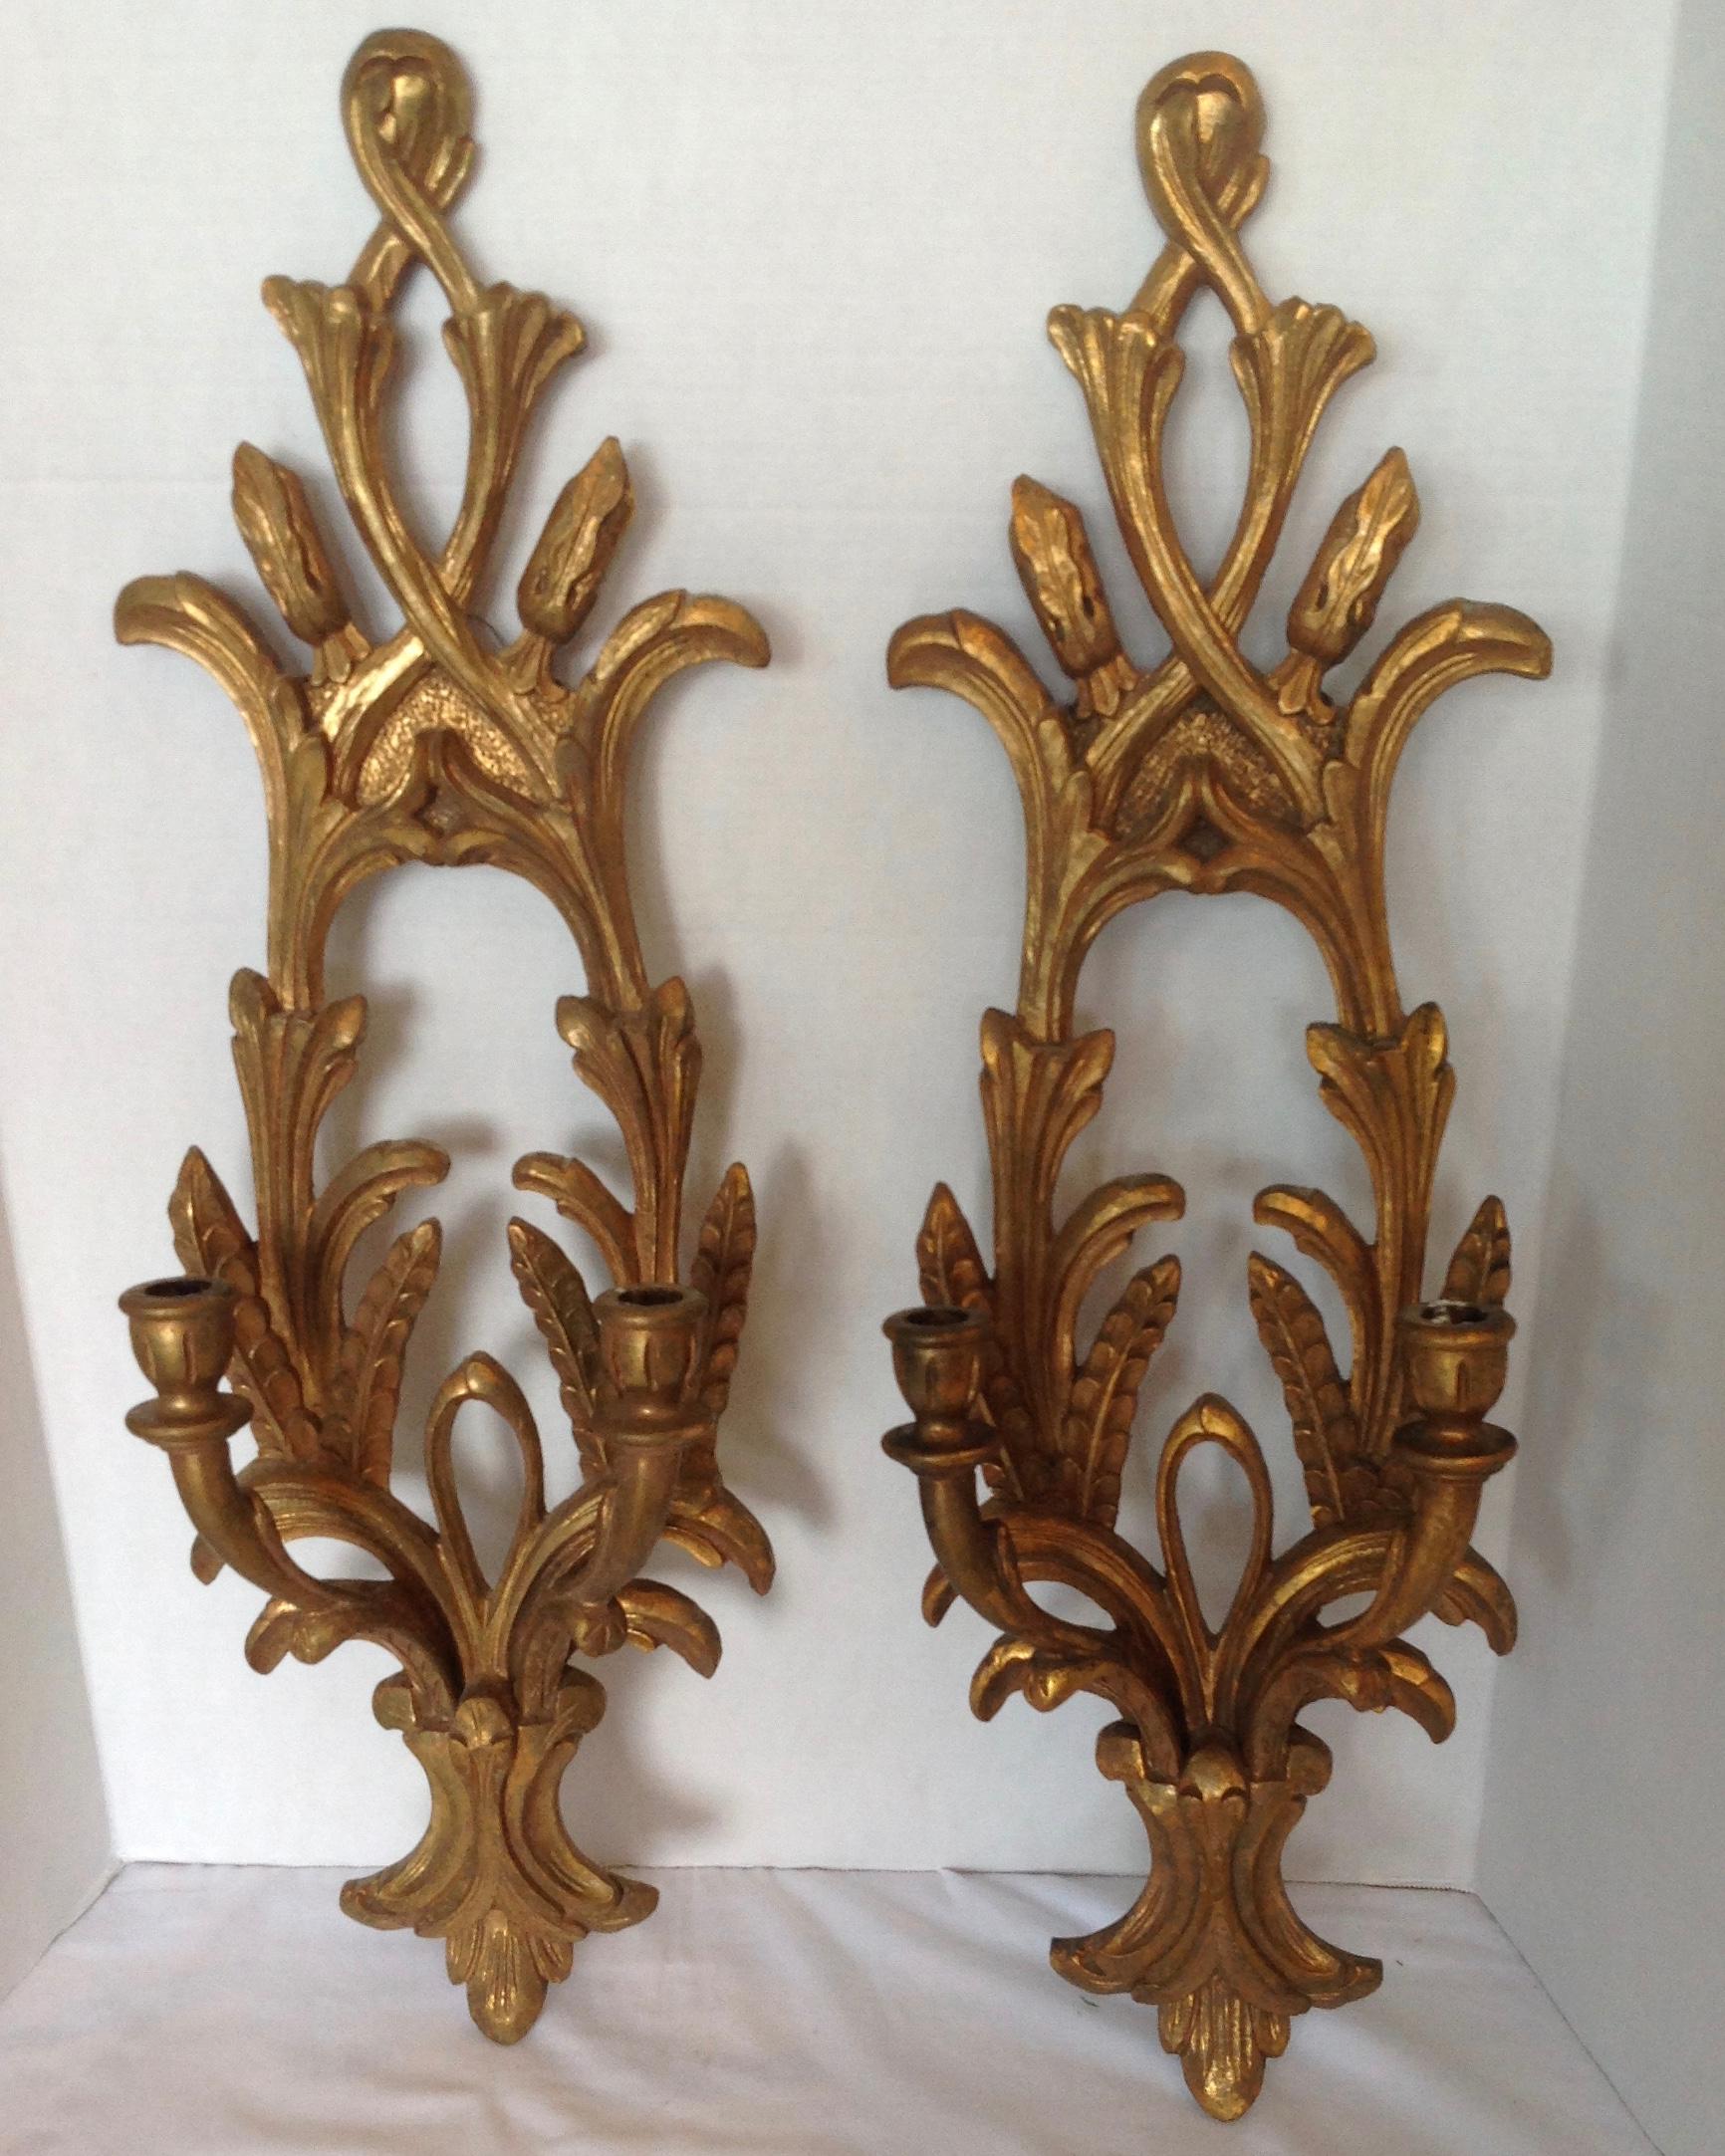 Superbly carved giltwood foliate style sconces of large dimensions.
They are outfitted for candles.